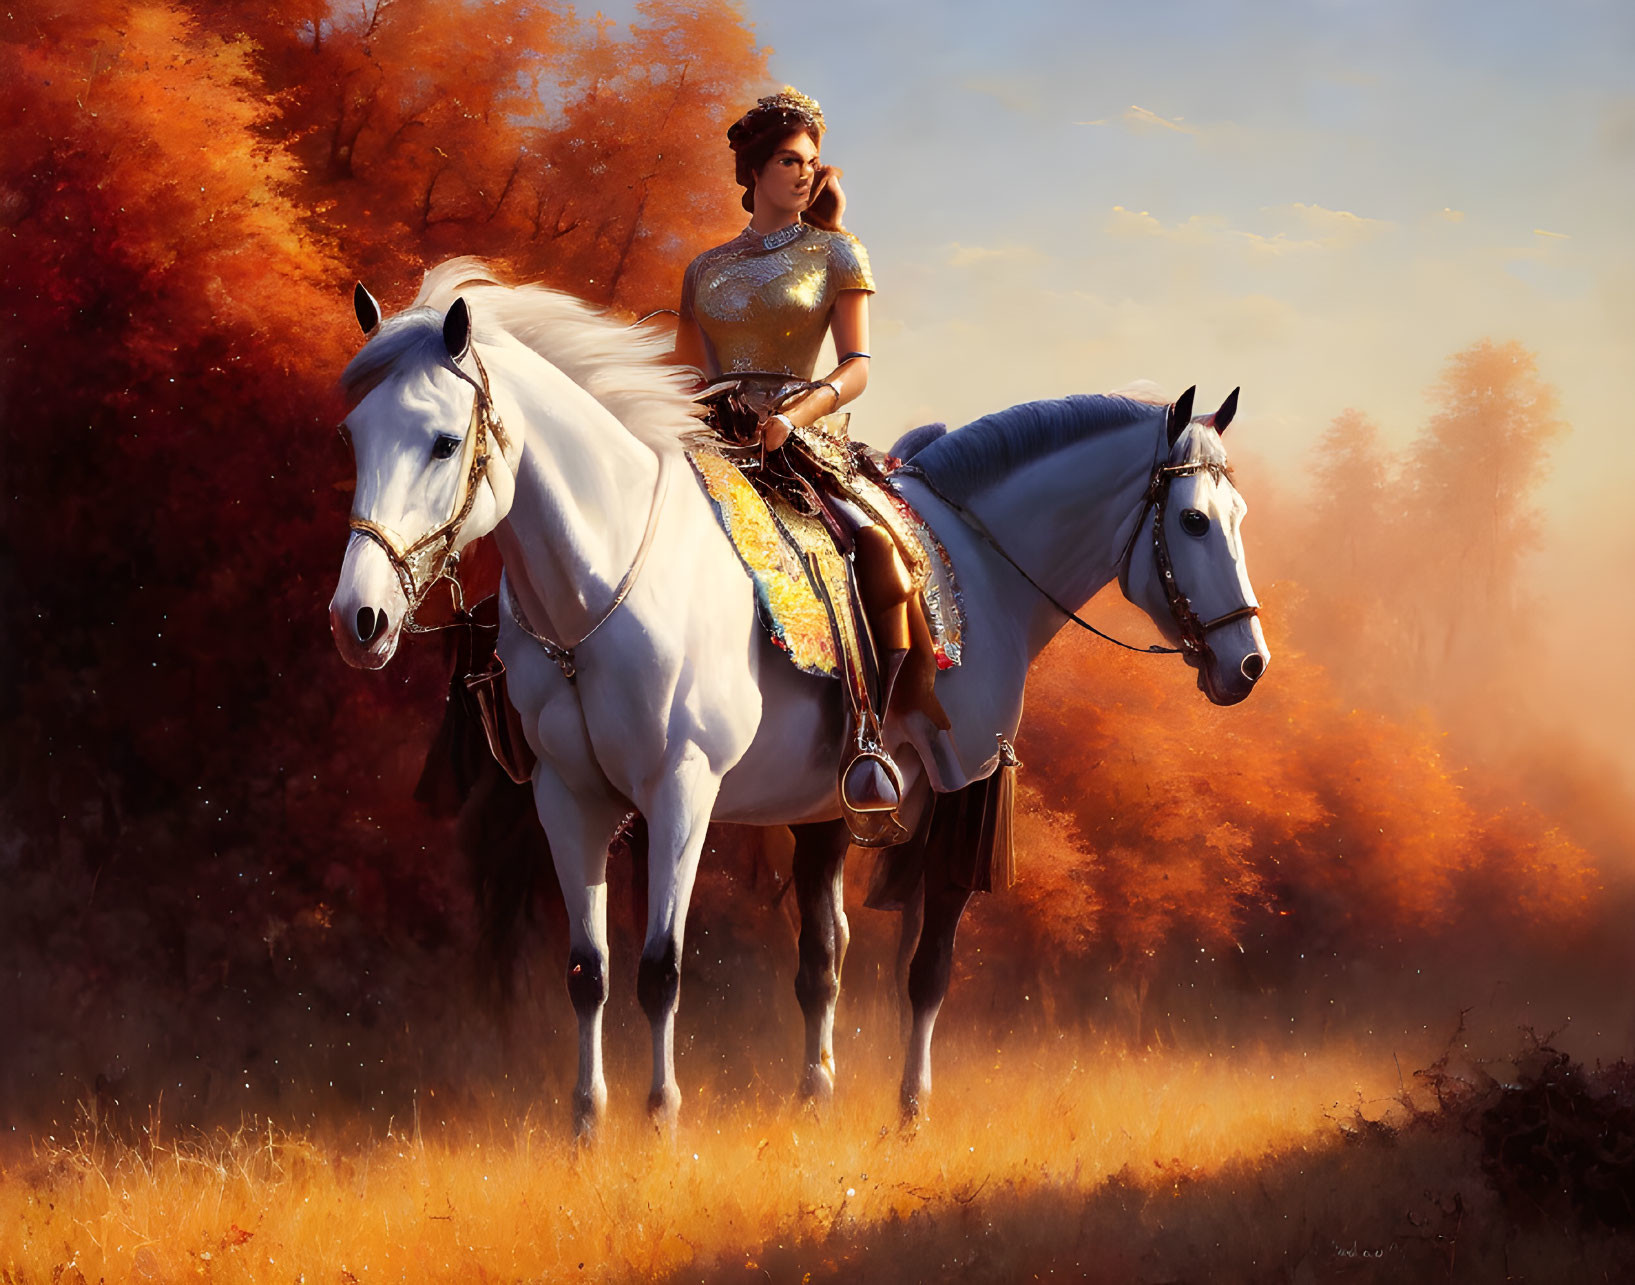 Medieval woman in armor on white horse with autumn backdrop